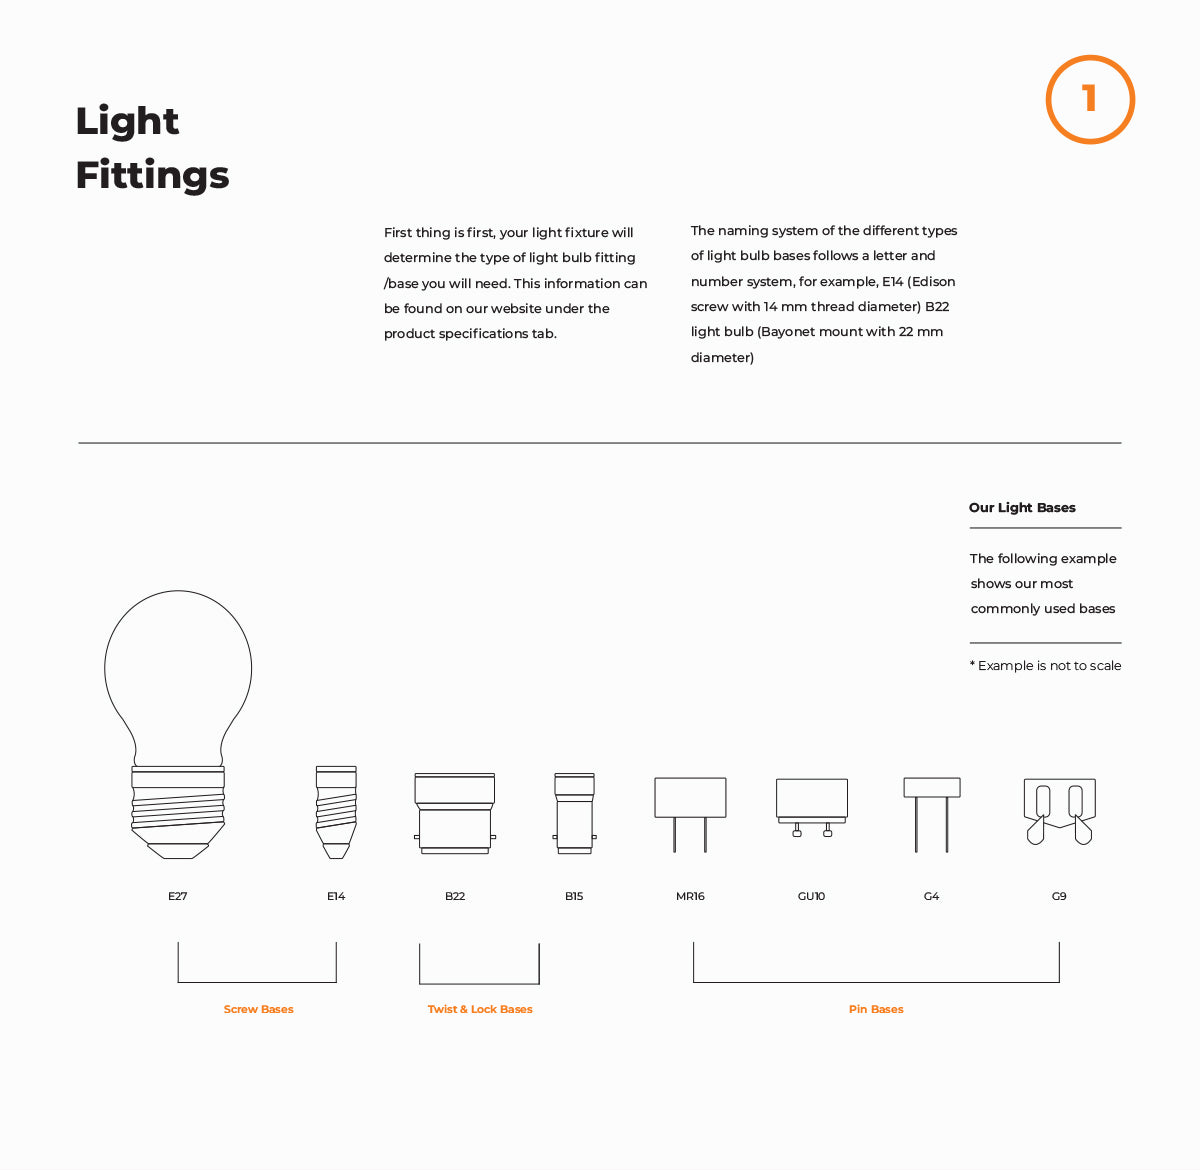 How to choose the right Light Bulb Fitting